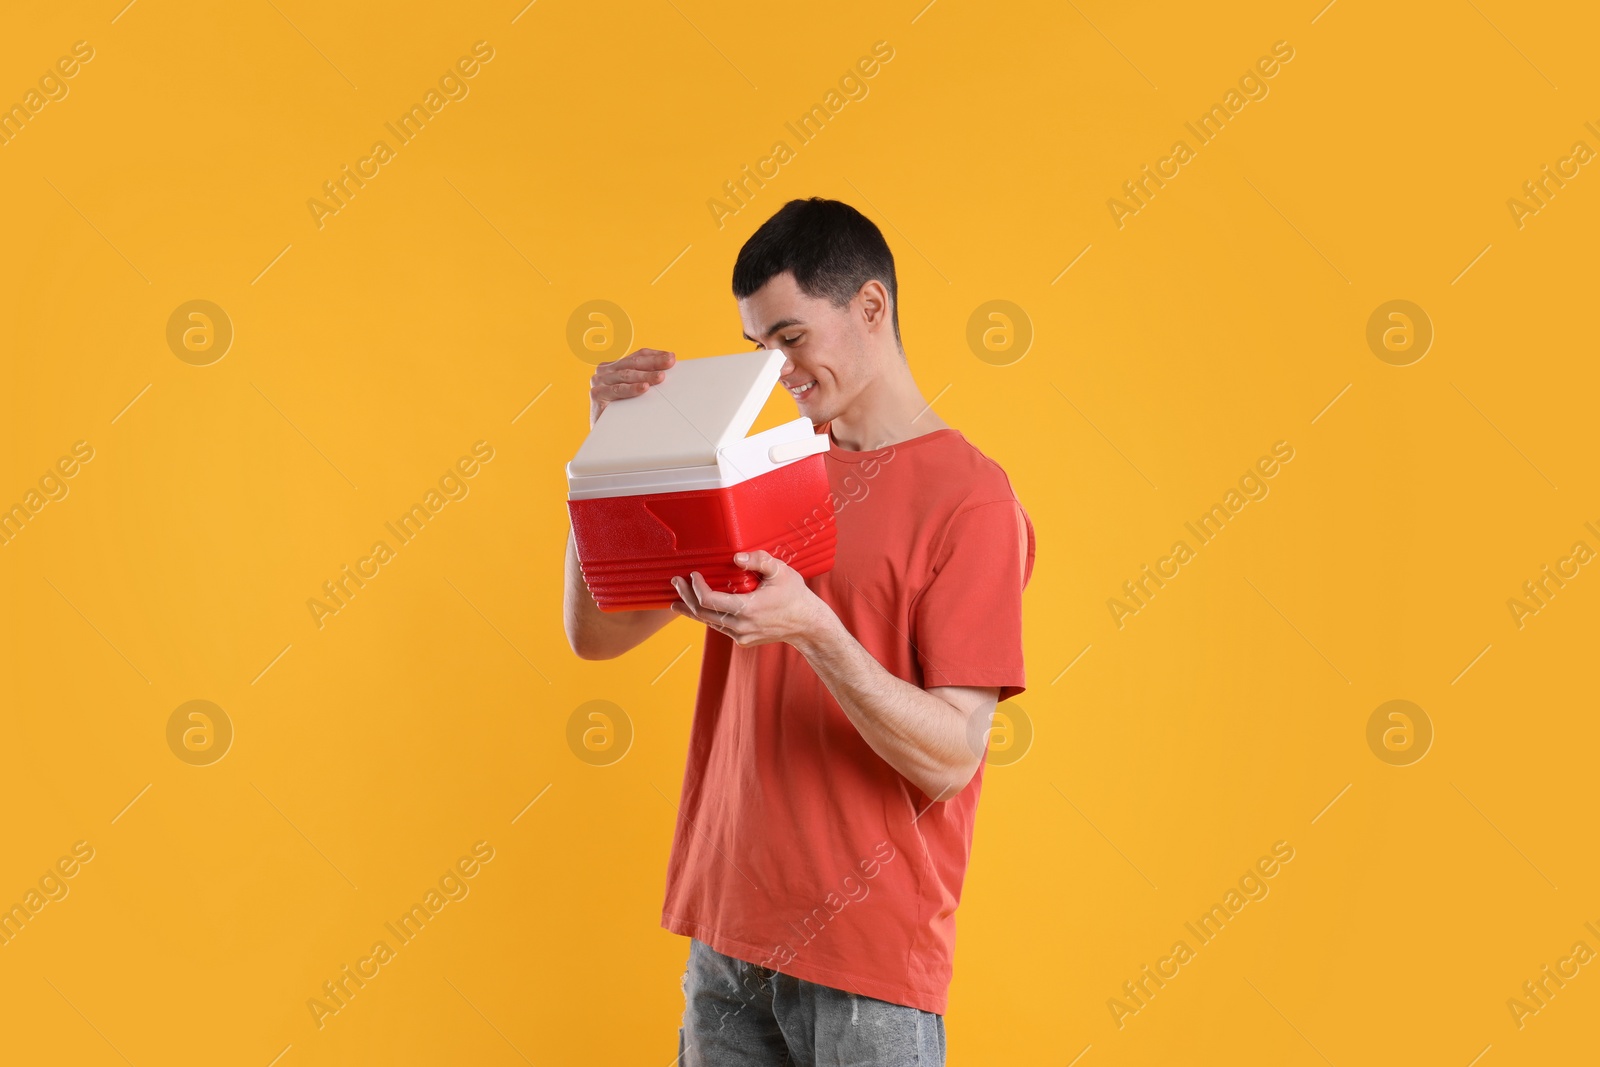 Photo of Man with red cool box on orange background